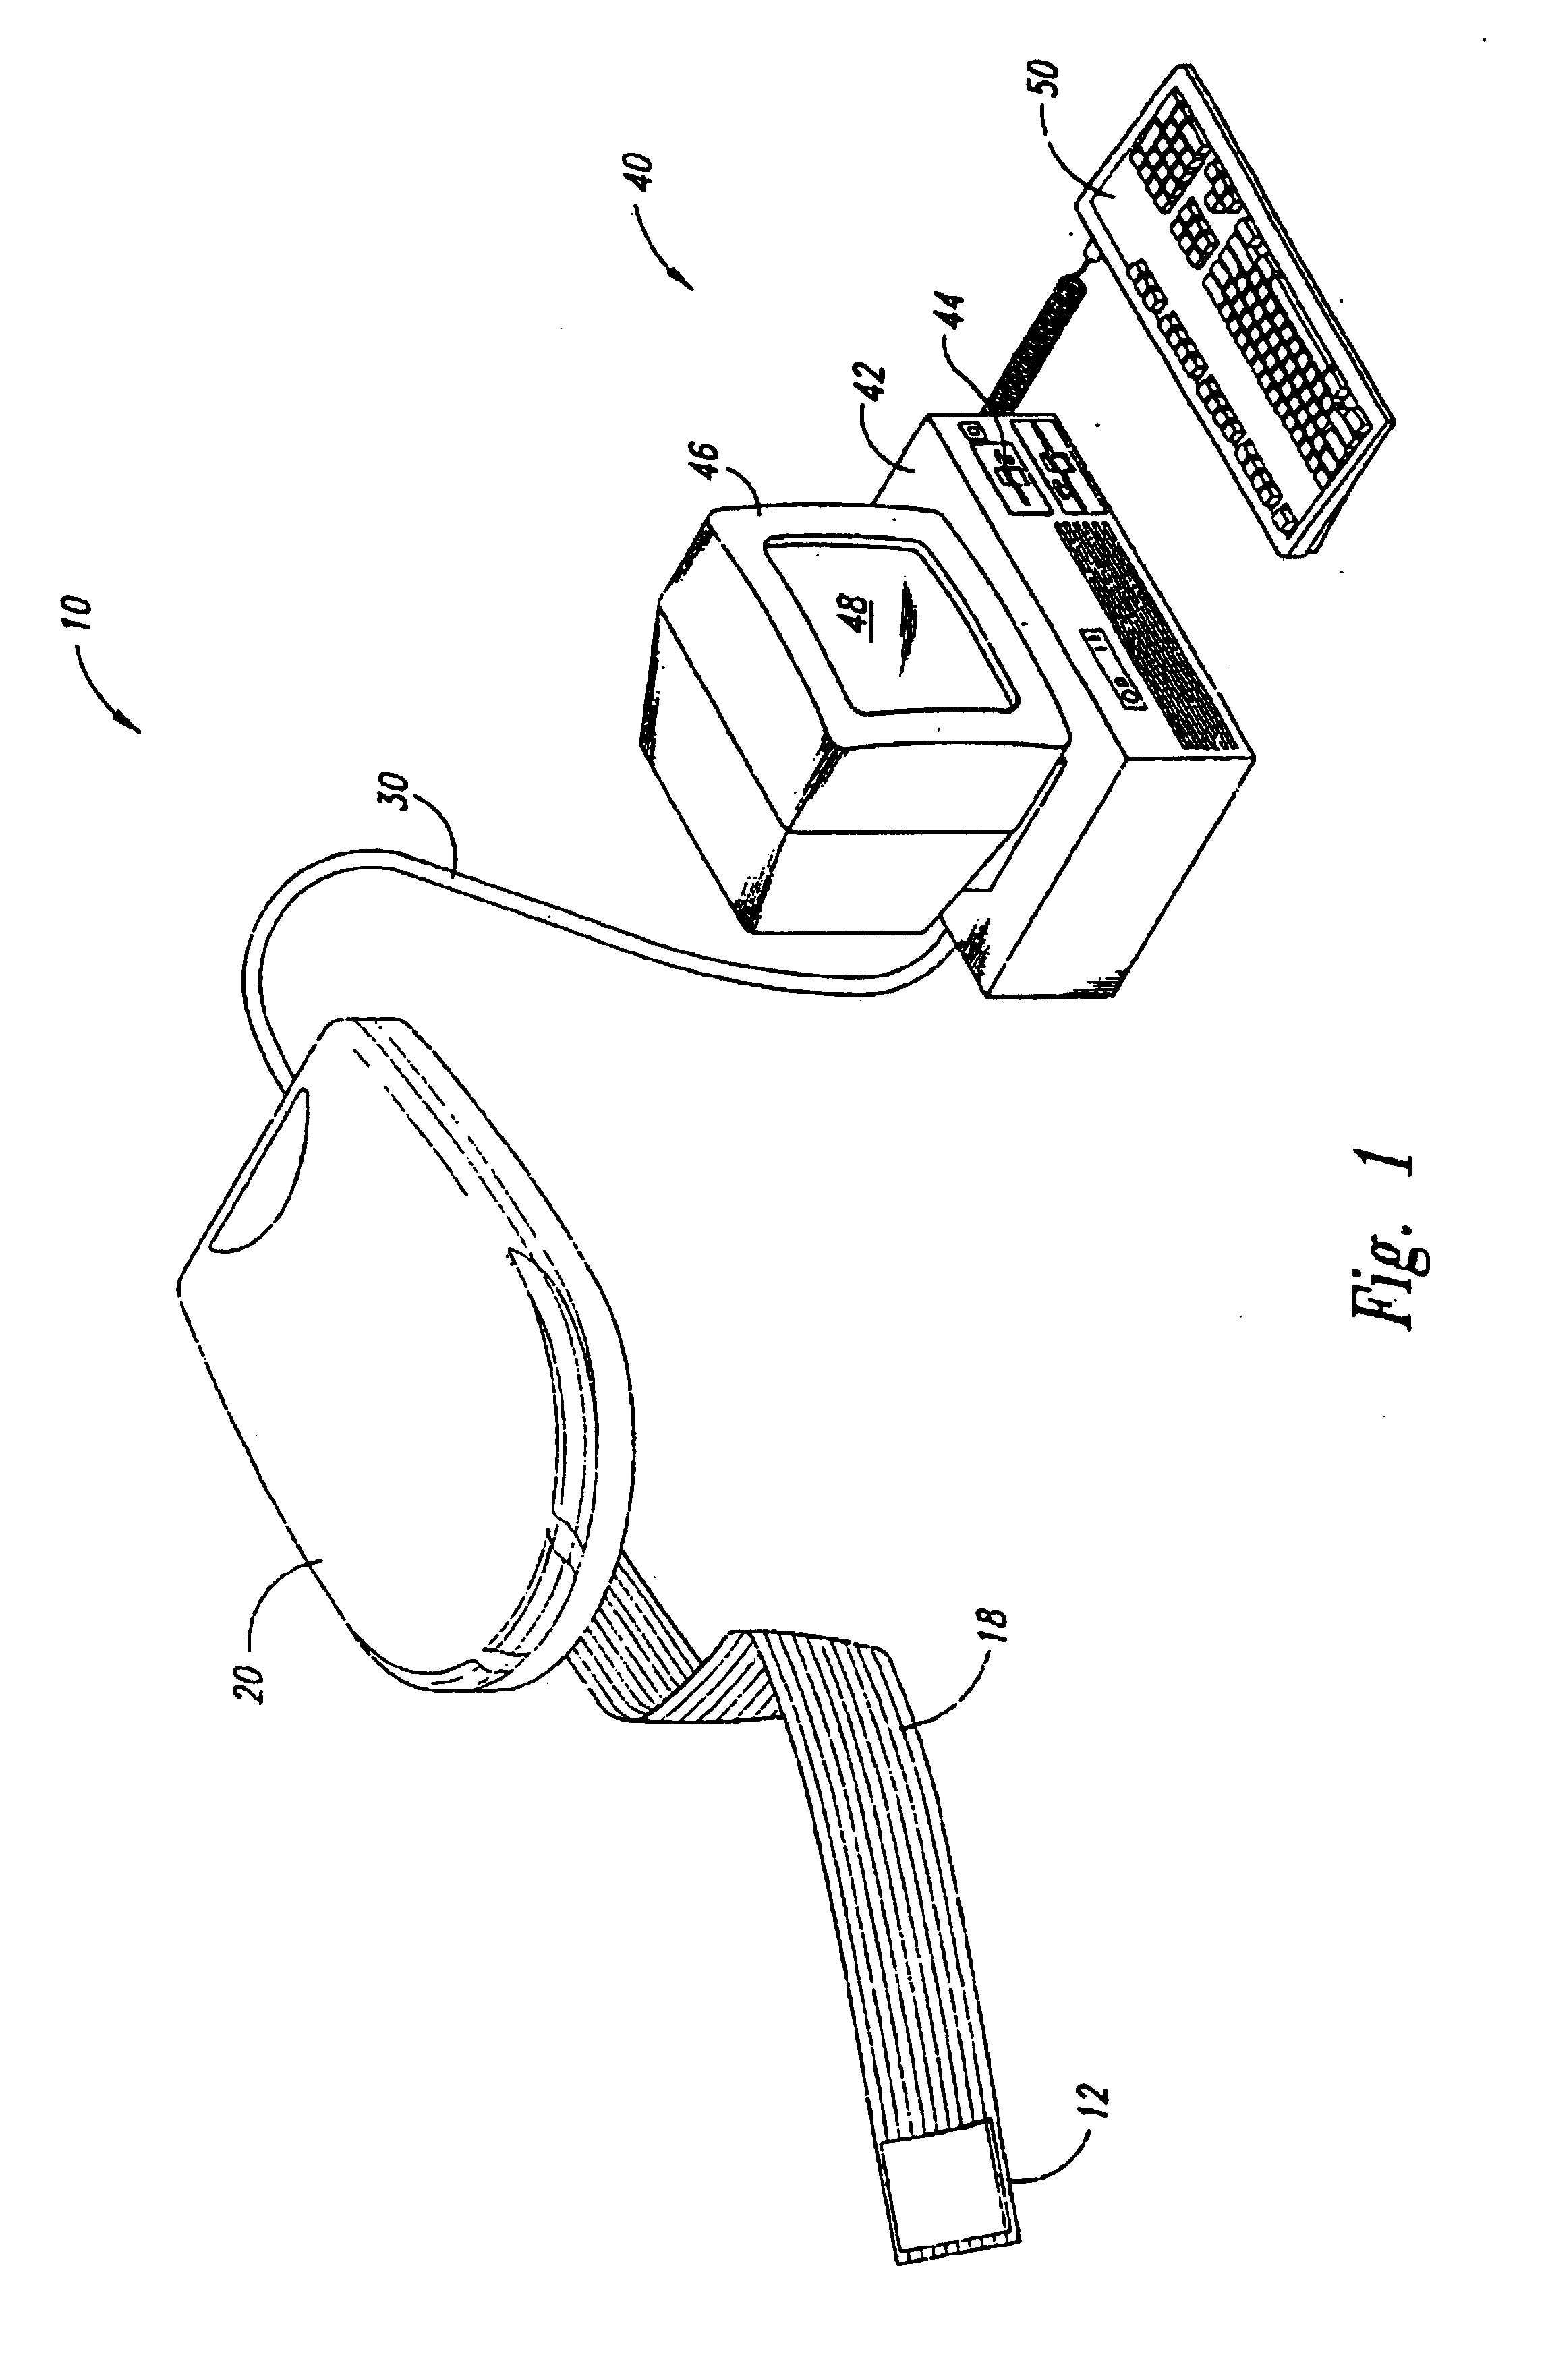 Software analysis system having an apparatus for selectively collecting analysis data from a target system executing software instrumented with tag statements and method for use thereof